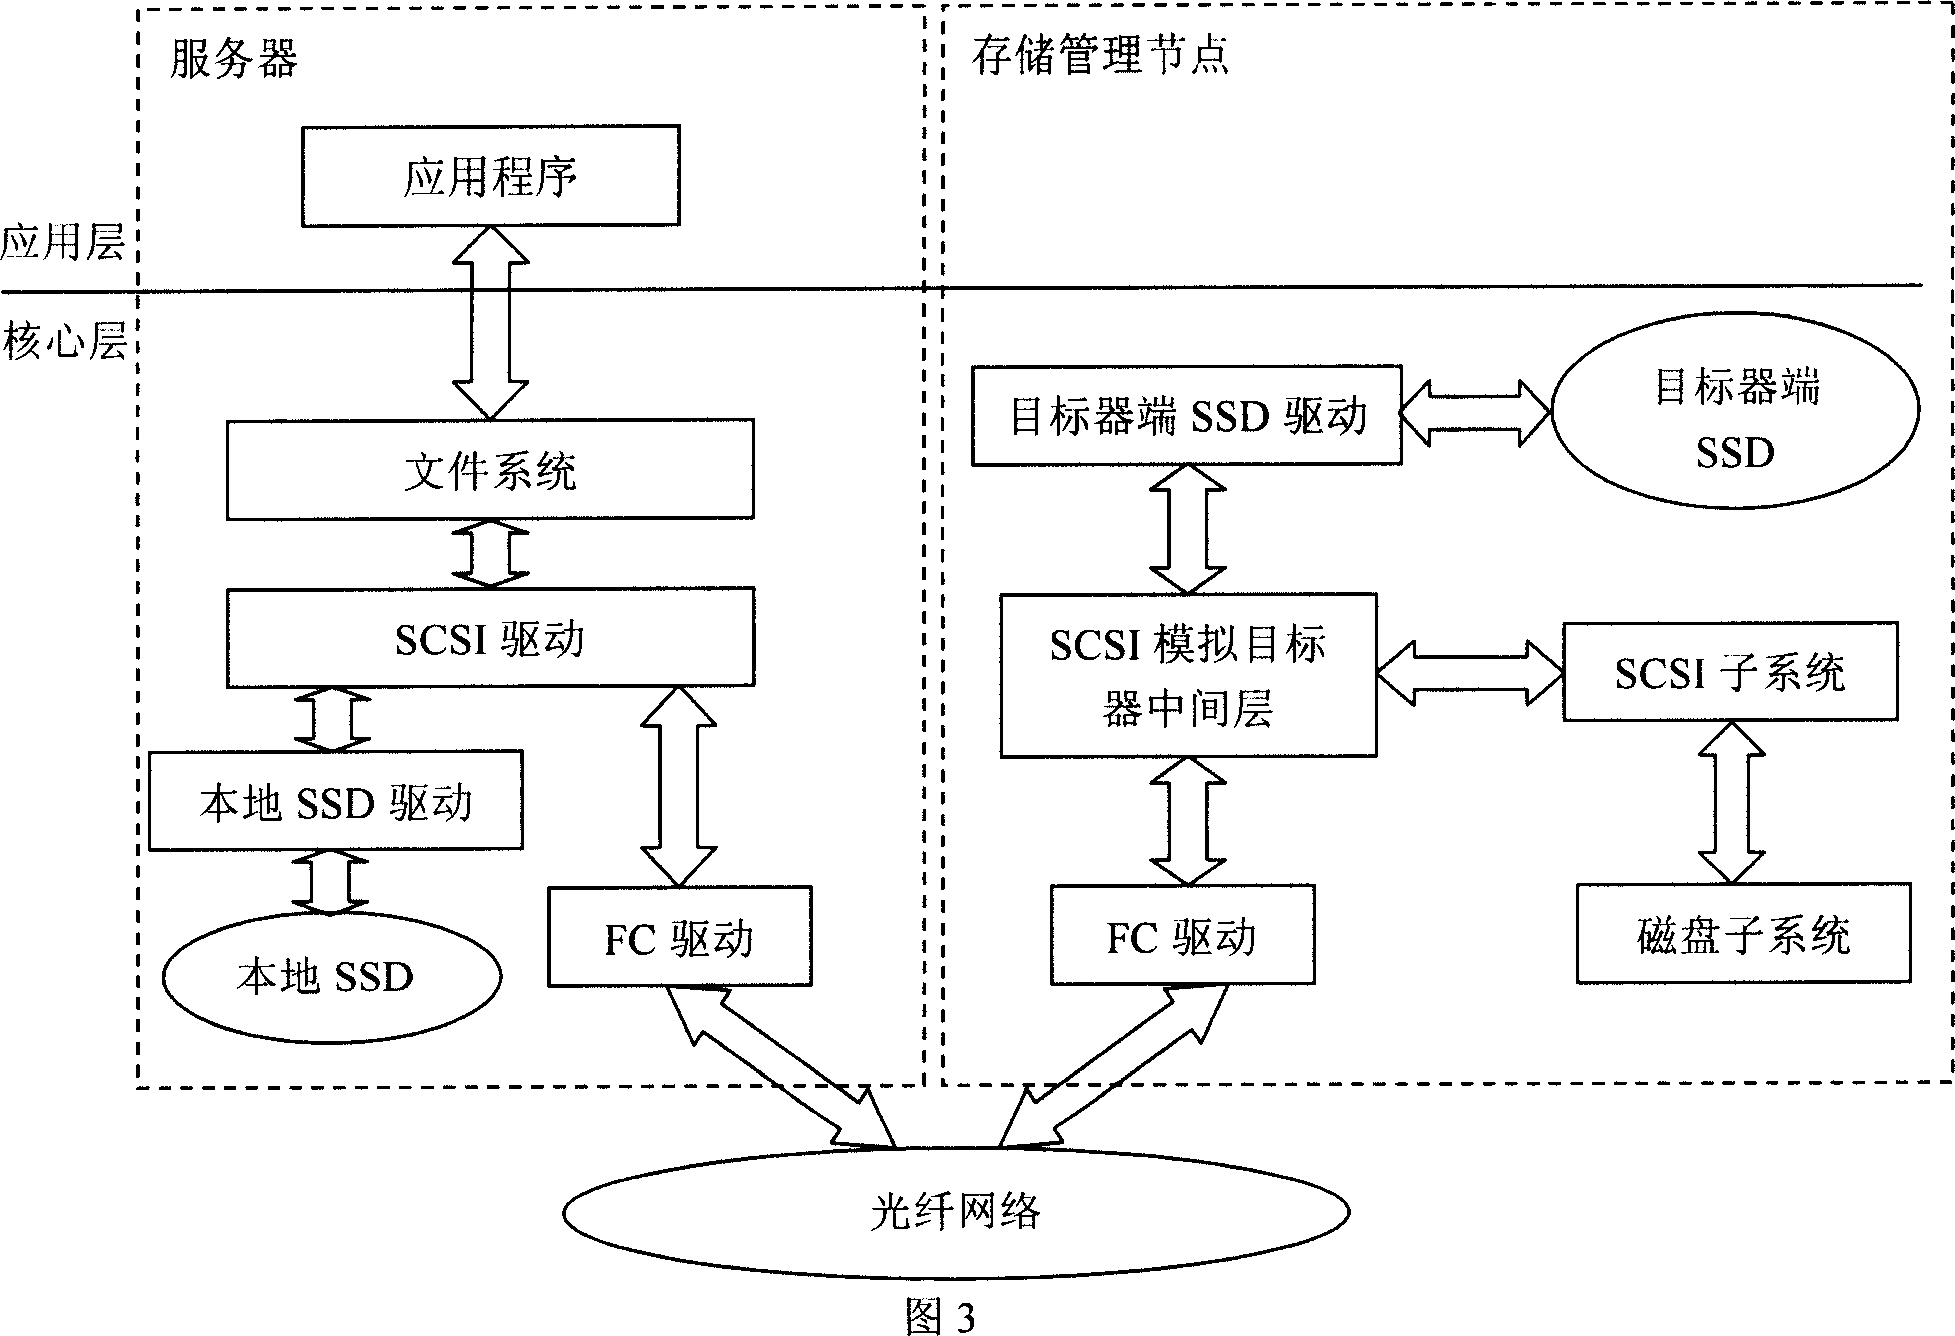 Method for realizing high speed solid storage device based on storage region network